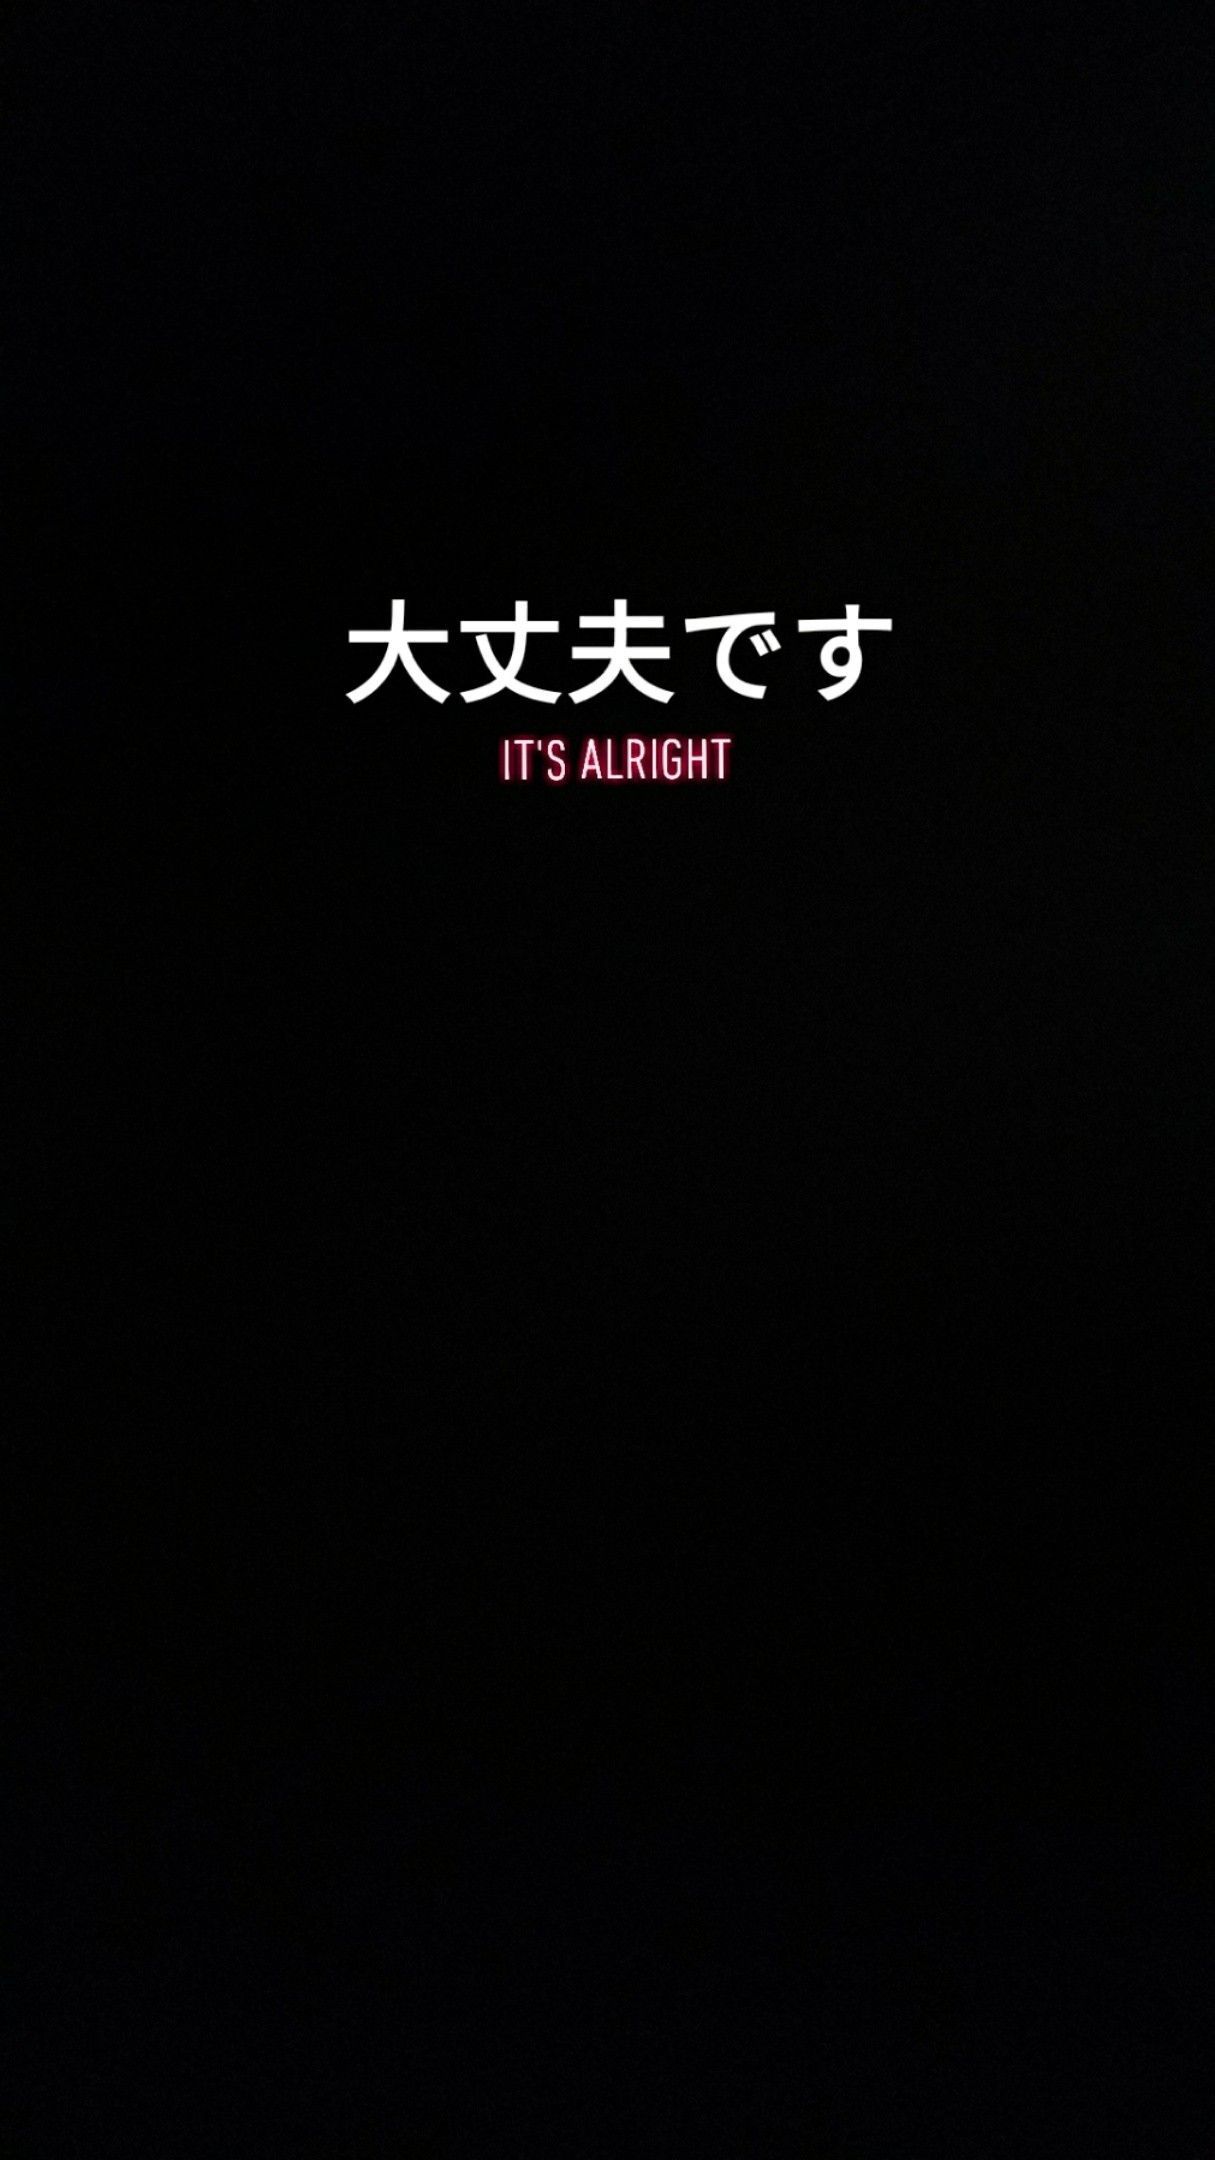 A black background with white writing in japanese - Japanese